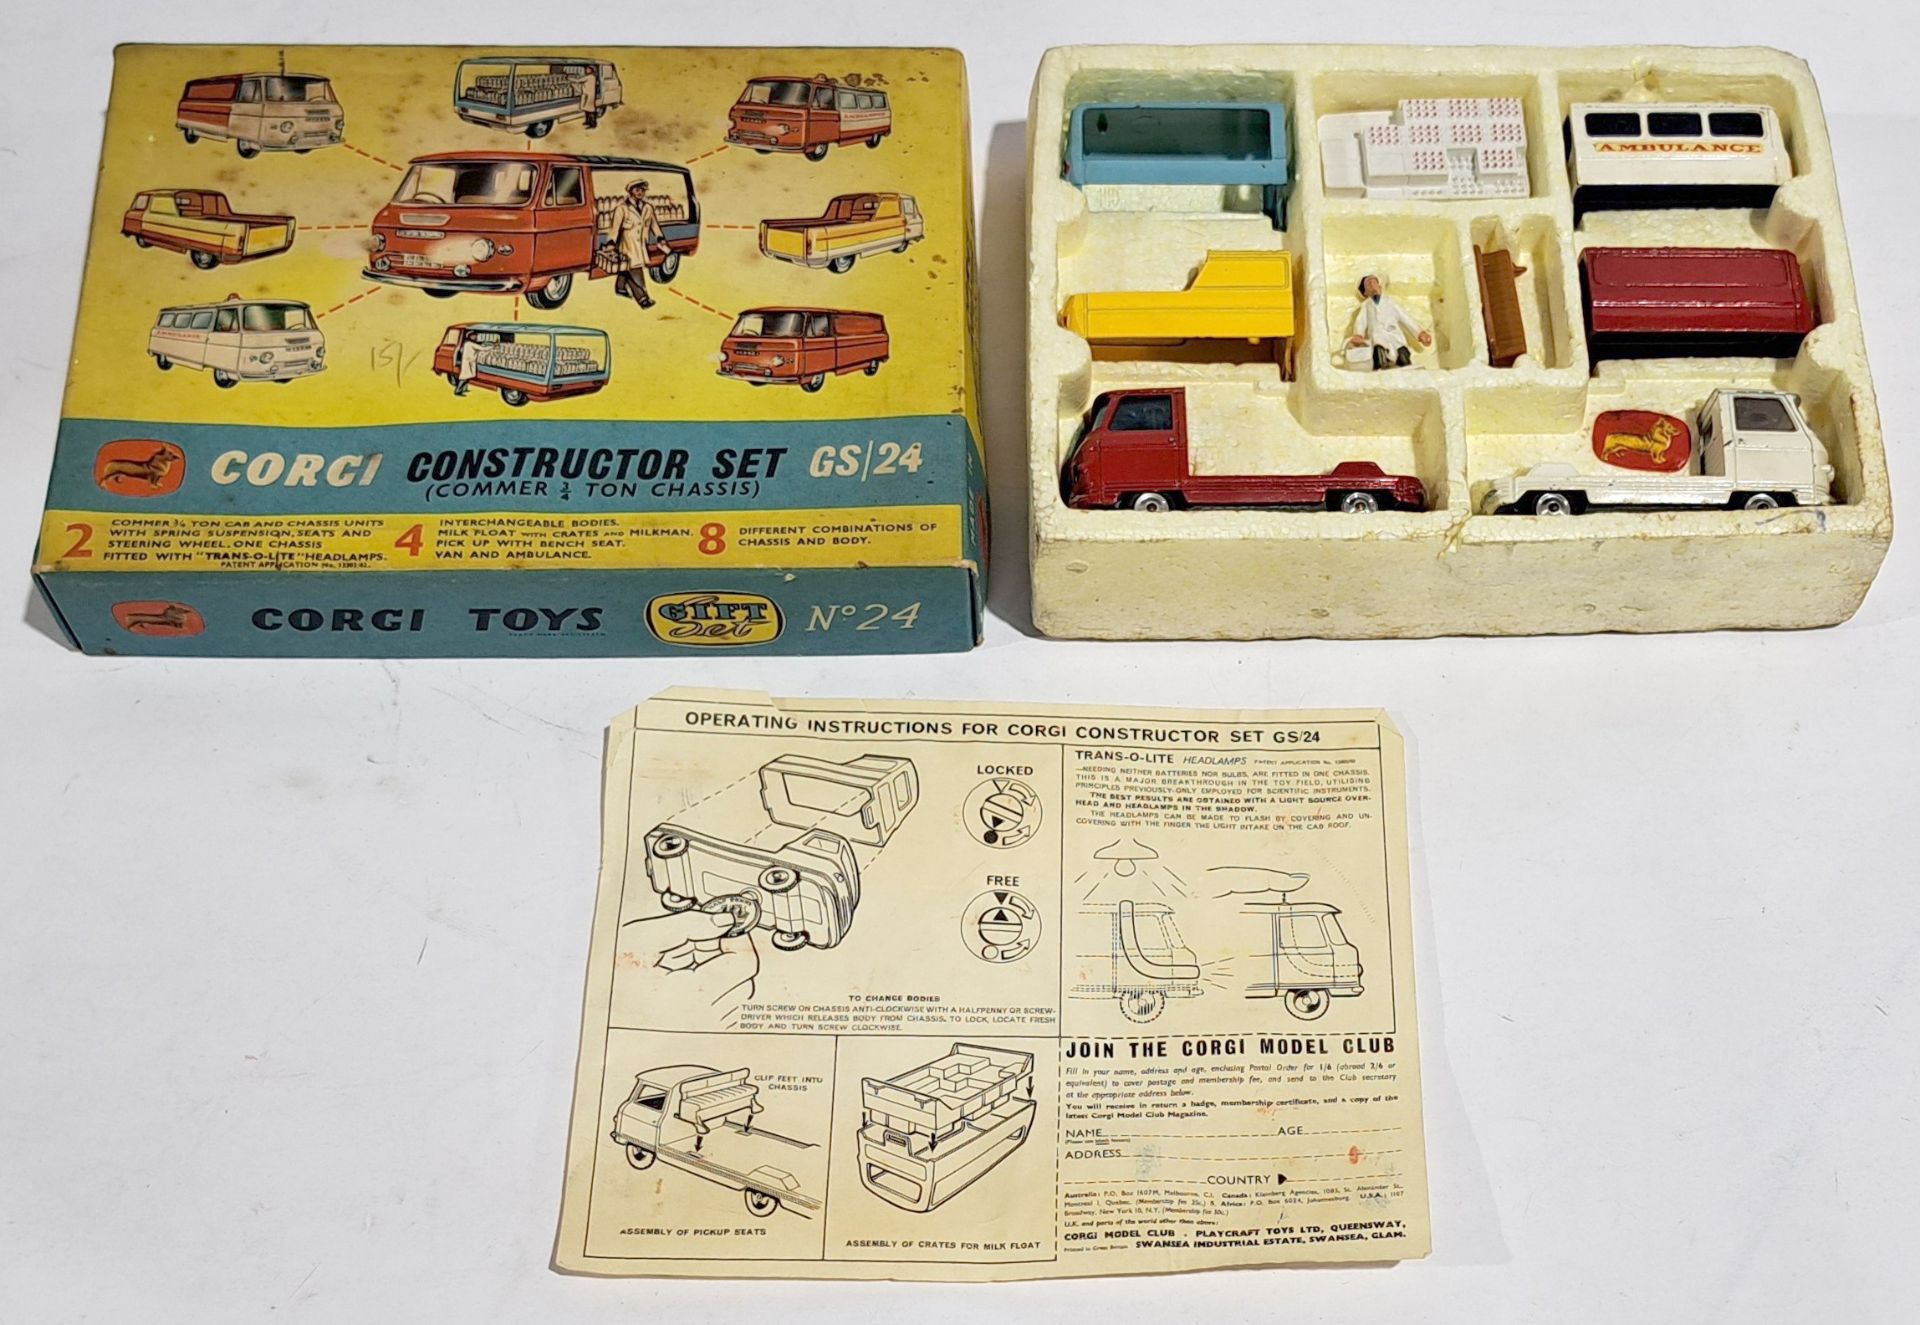 Corgi Constructor Set (Commer ¾ Ton Chassis) GS/24, boxed